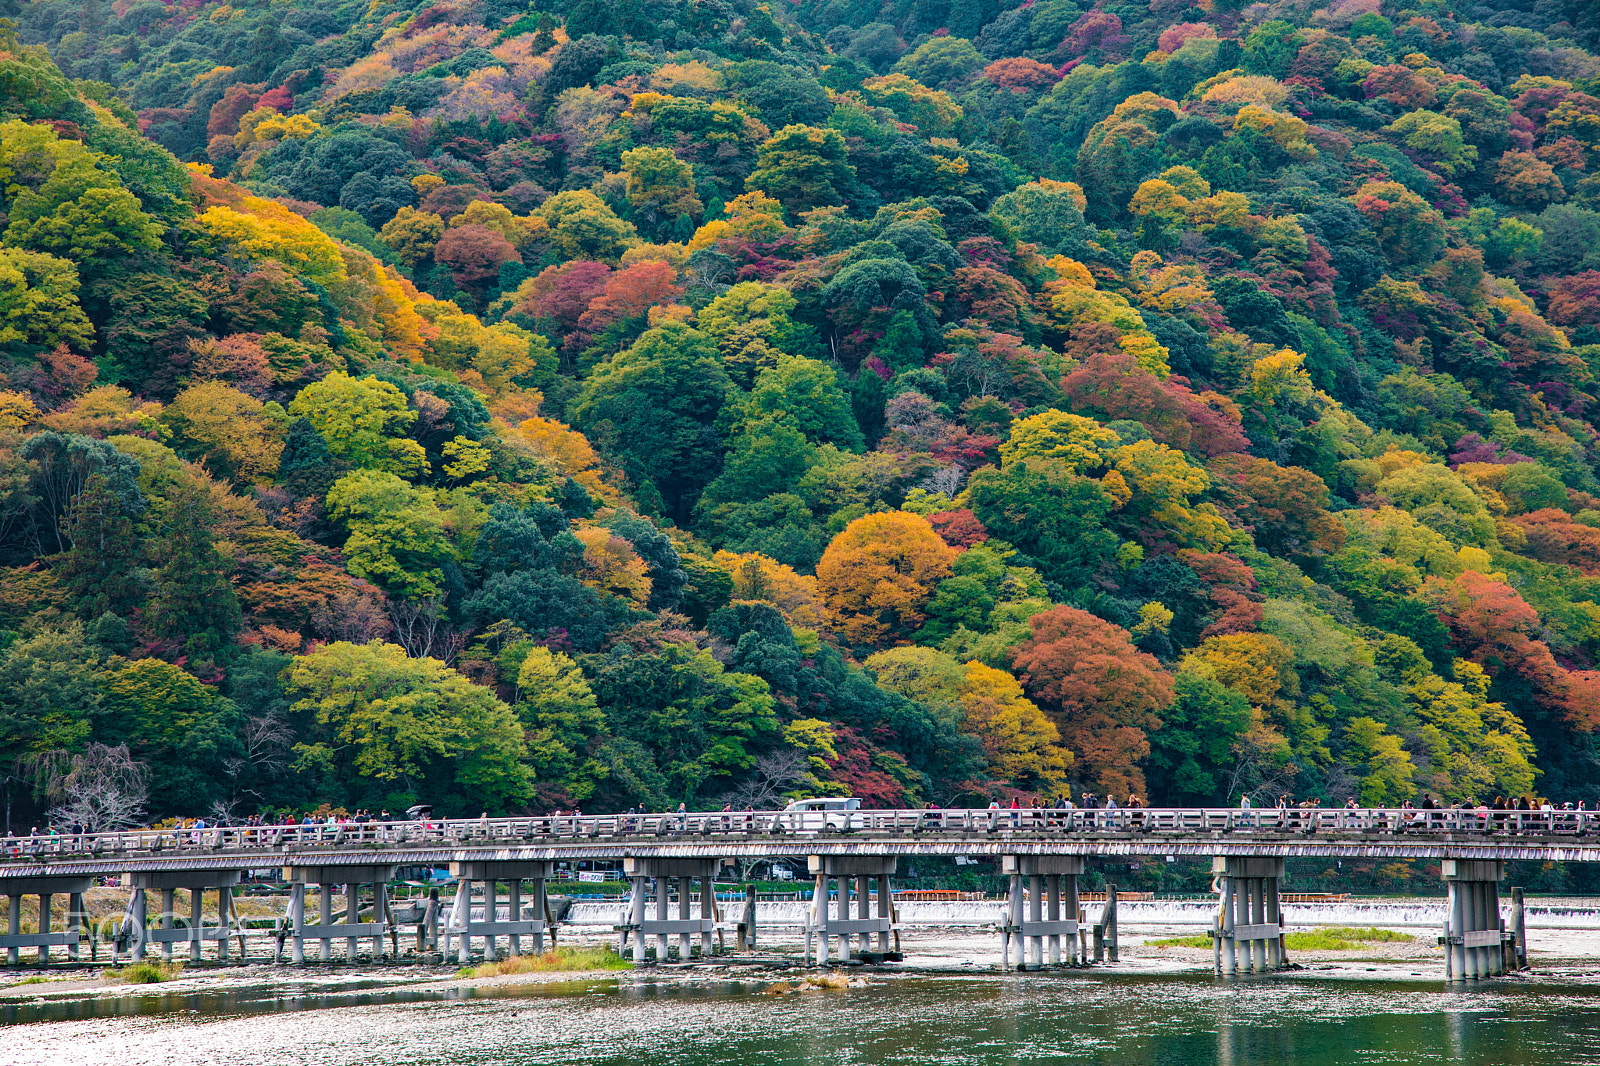 Canon EOS 5D Mark IV + Sigma 24-105mm f/4 DG OS HSM | A sample photo. Autumn afternoon in kyoto photography